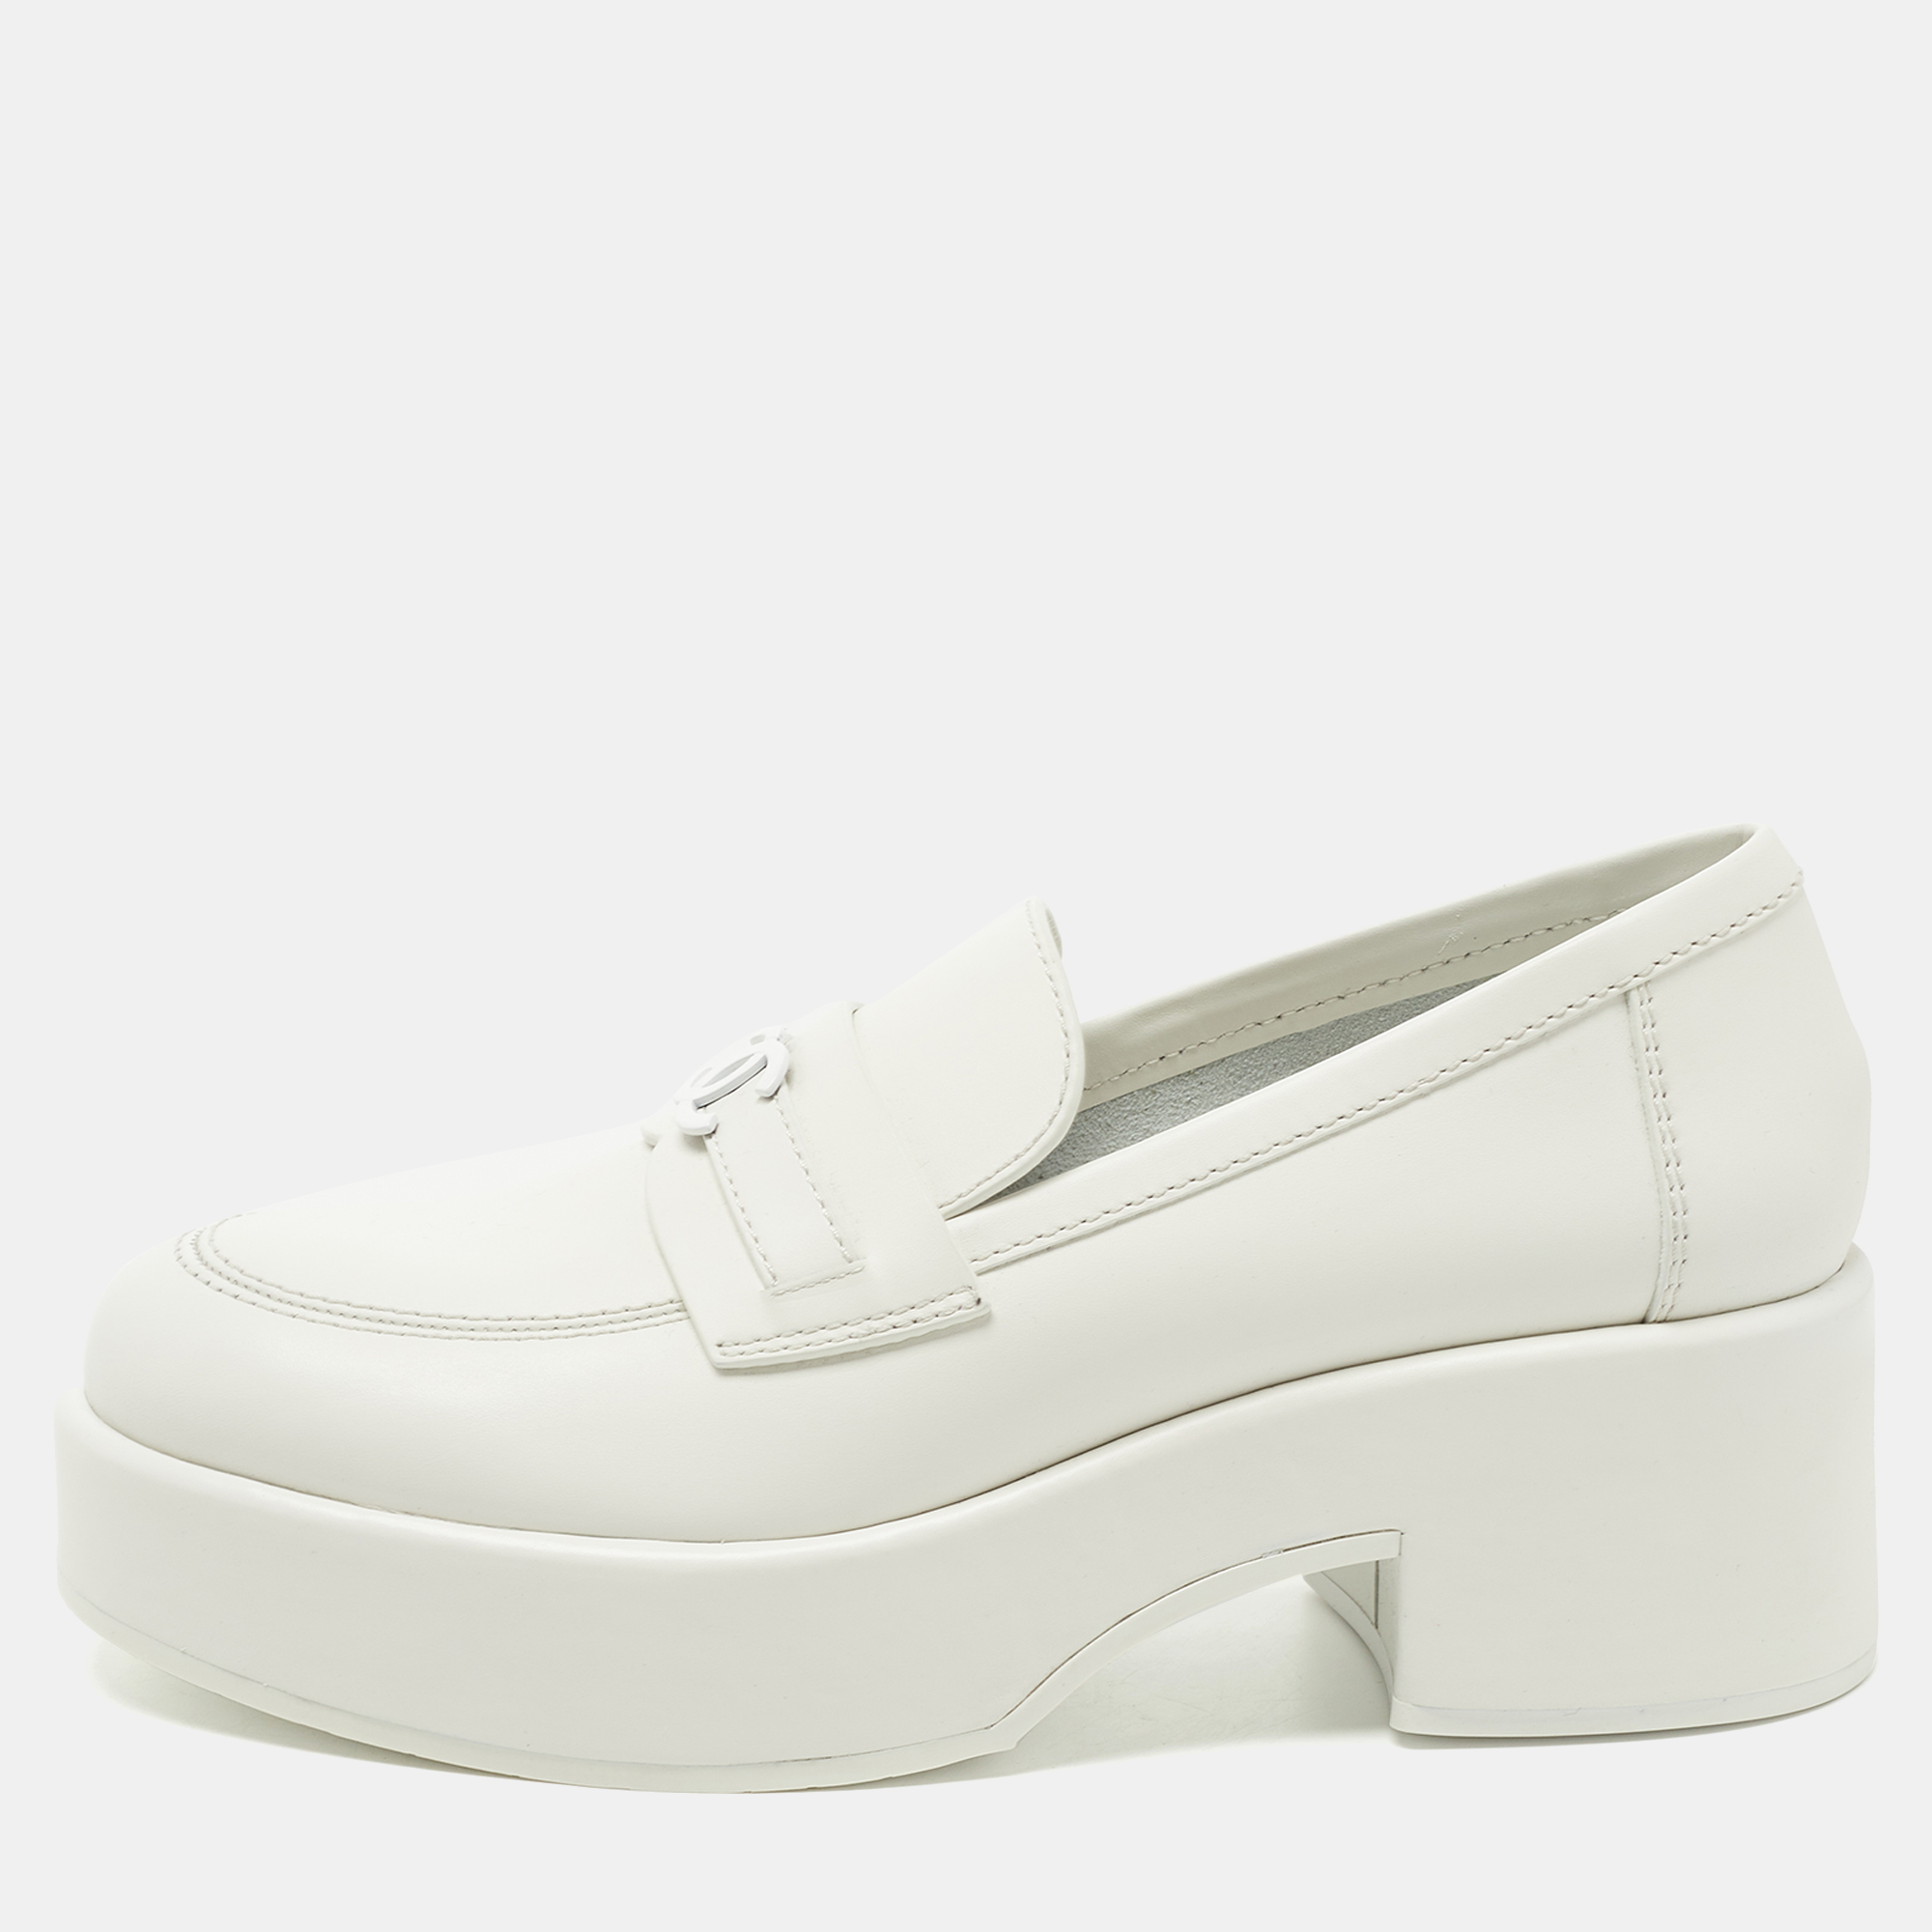 Pre-owned Chanel White Leather Cc Platform Loafers Size 39